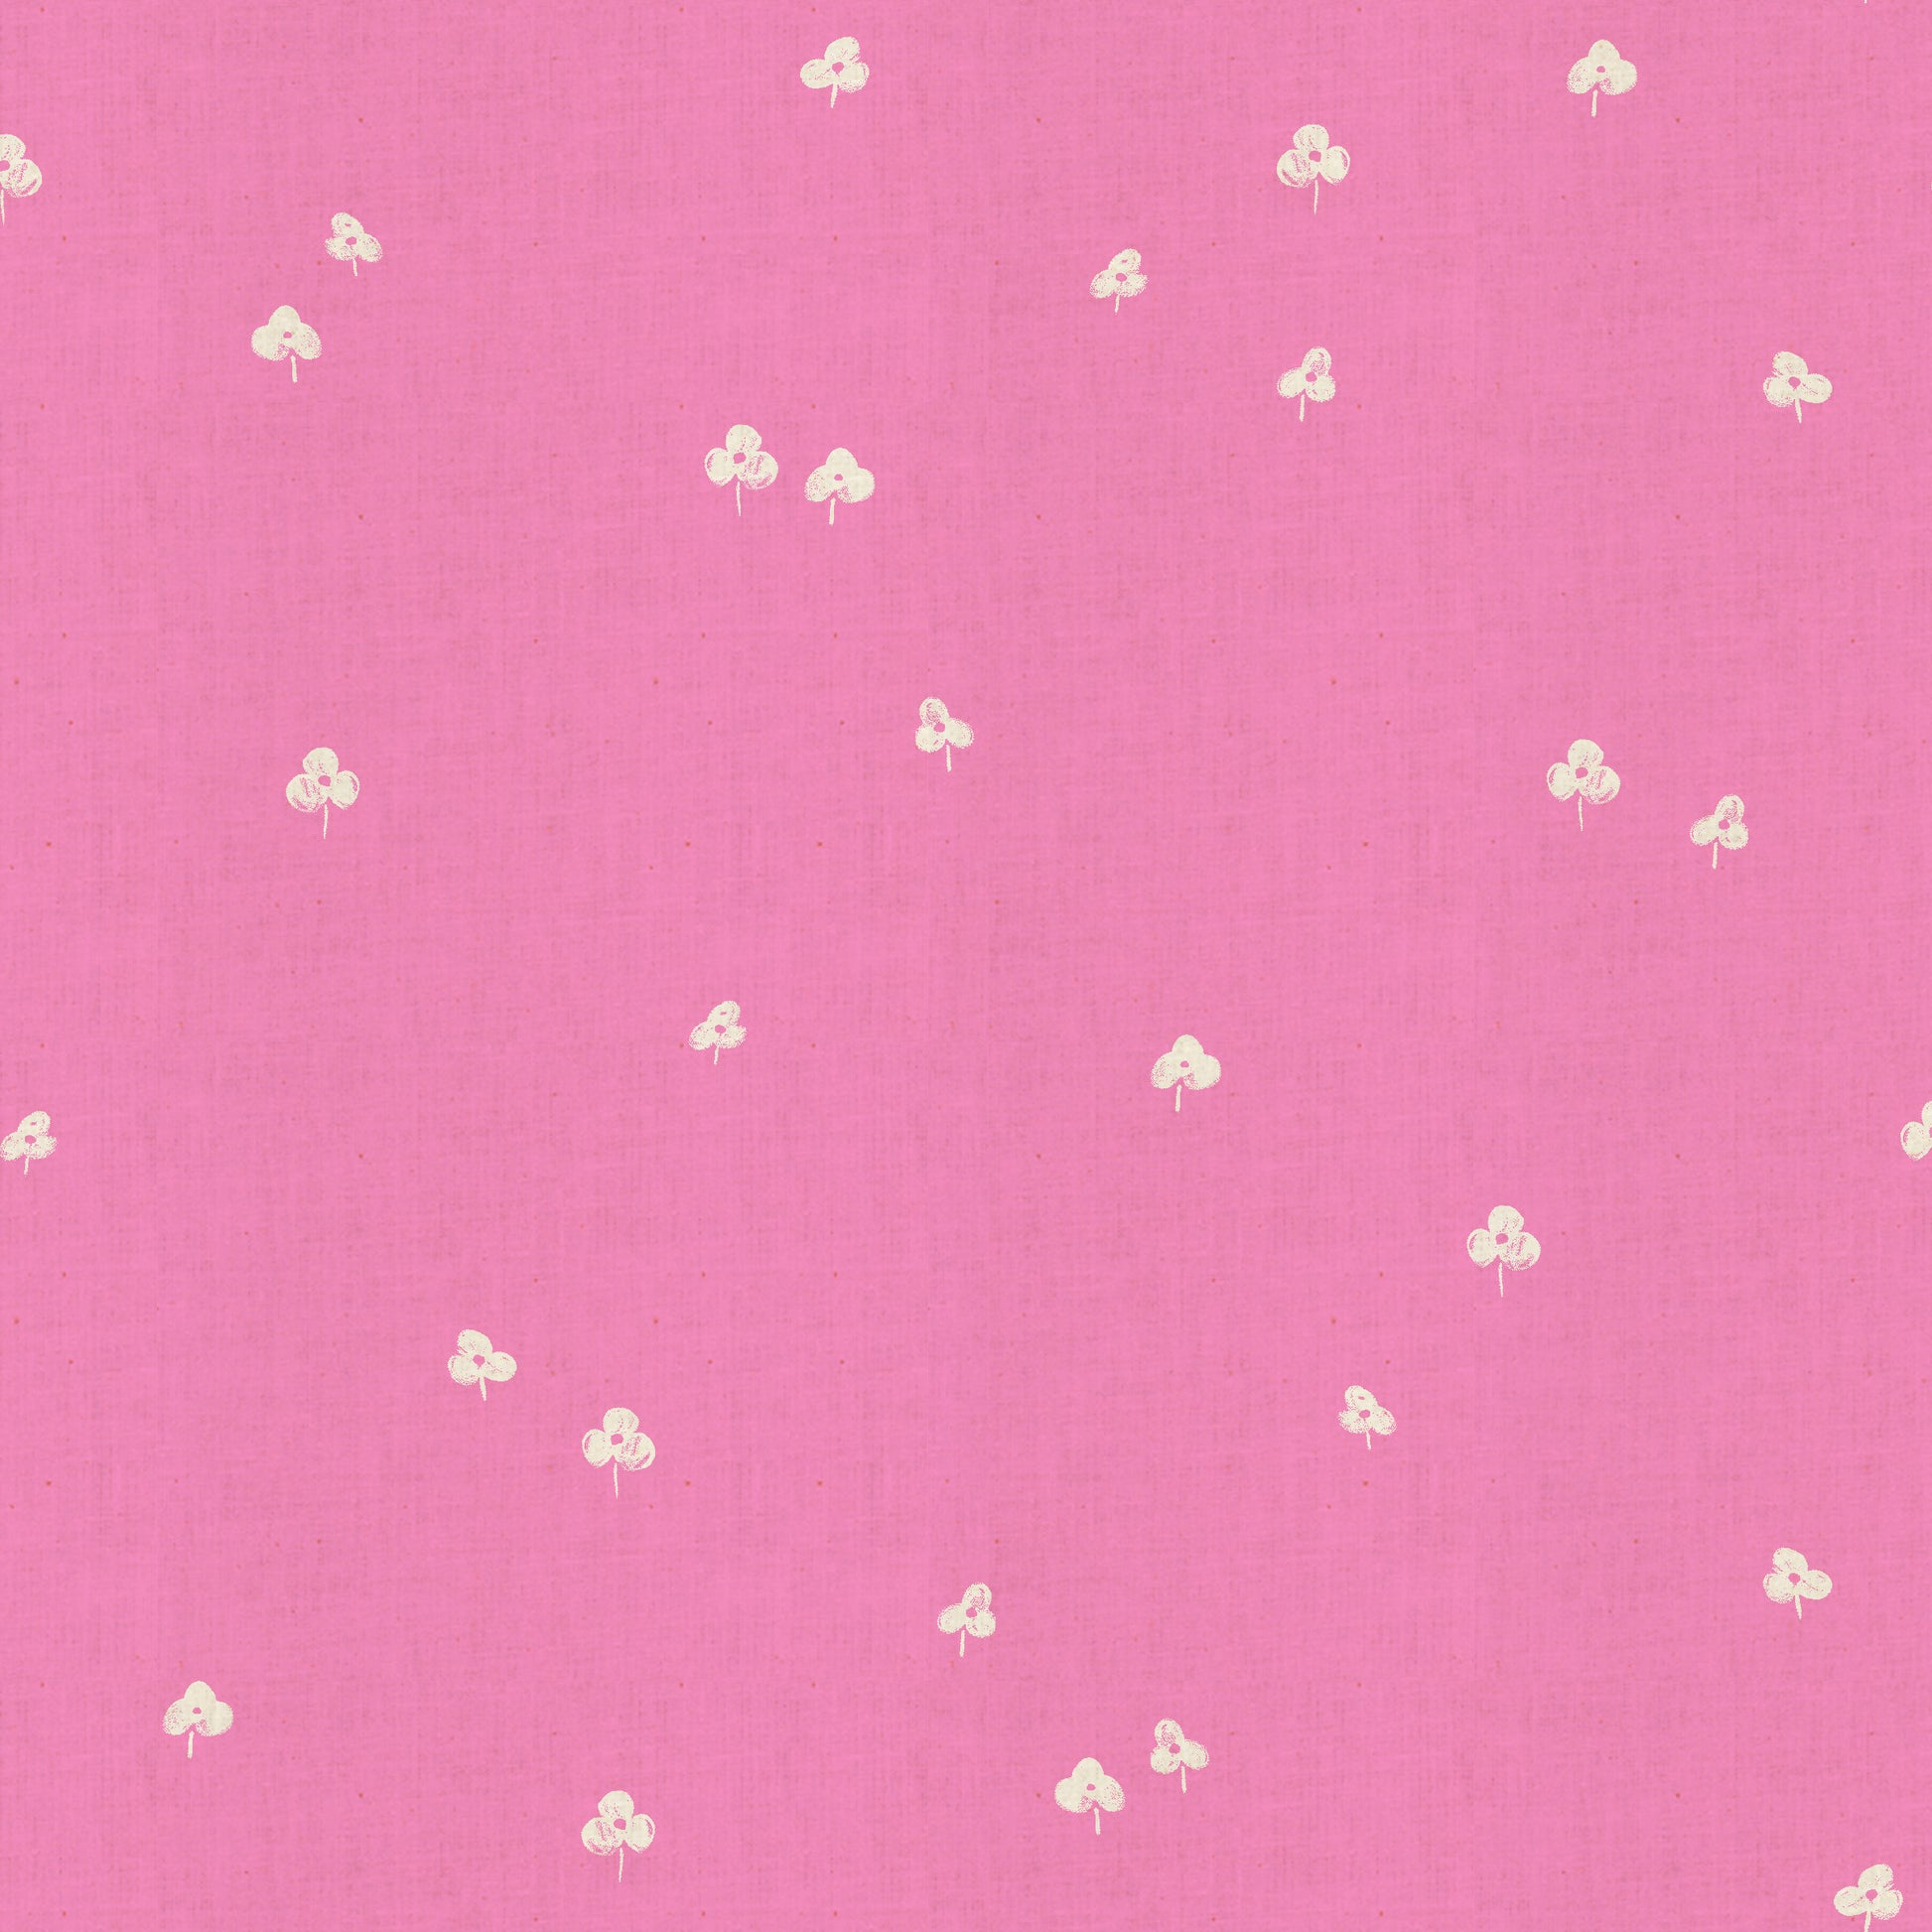 Manufacturer: RJR Fabrics Designer: Cotton + Steel Collection: Cotton + Steel Basics Print Name: Clover and Over in Sweet Pea Unbleached Material: 100% Cotton Weight: Quilting  SKU: CS105-SW3U Width: 44 inches